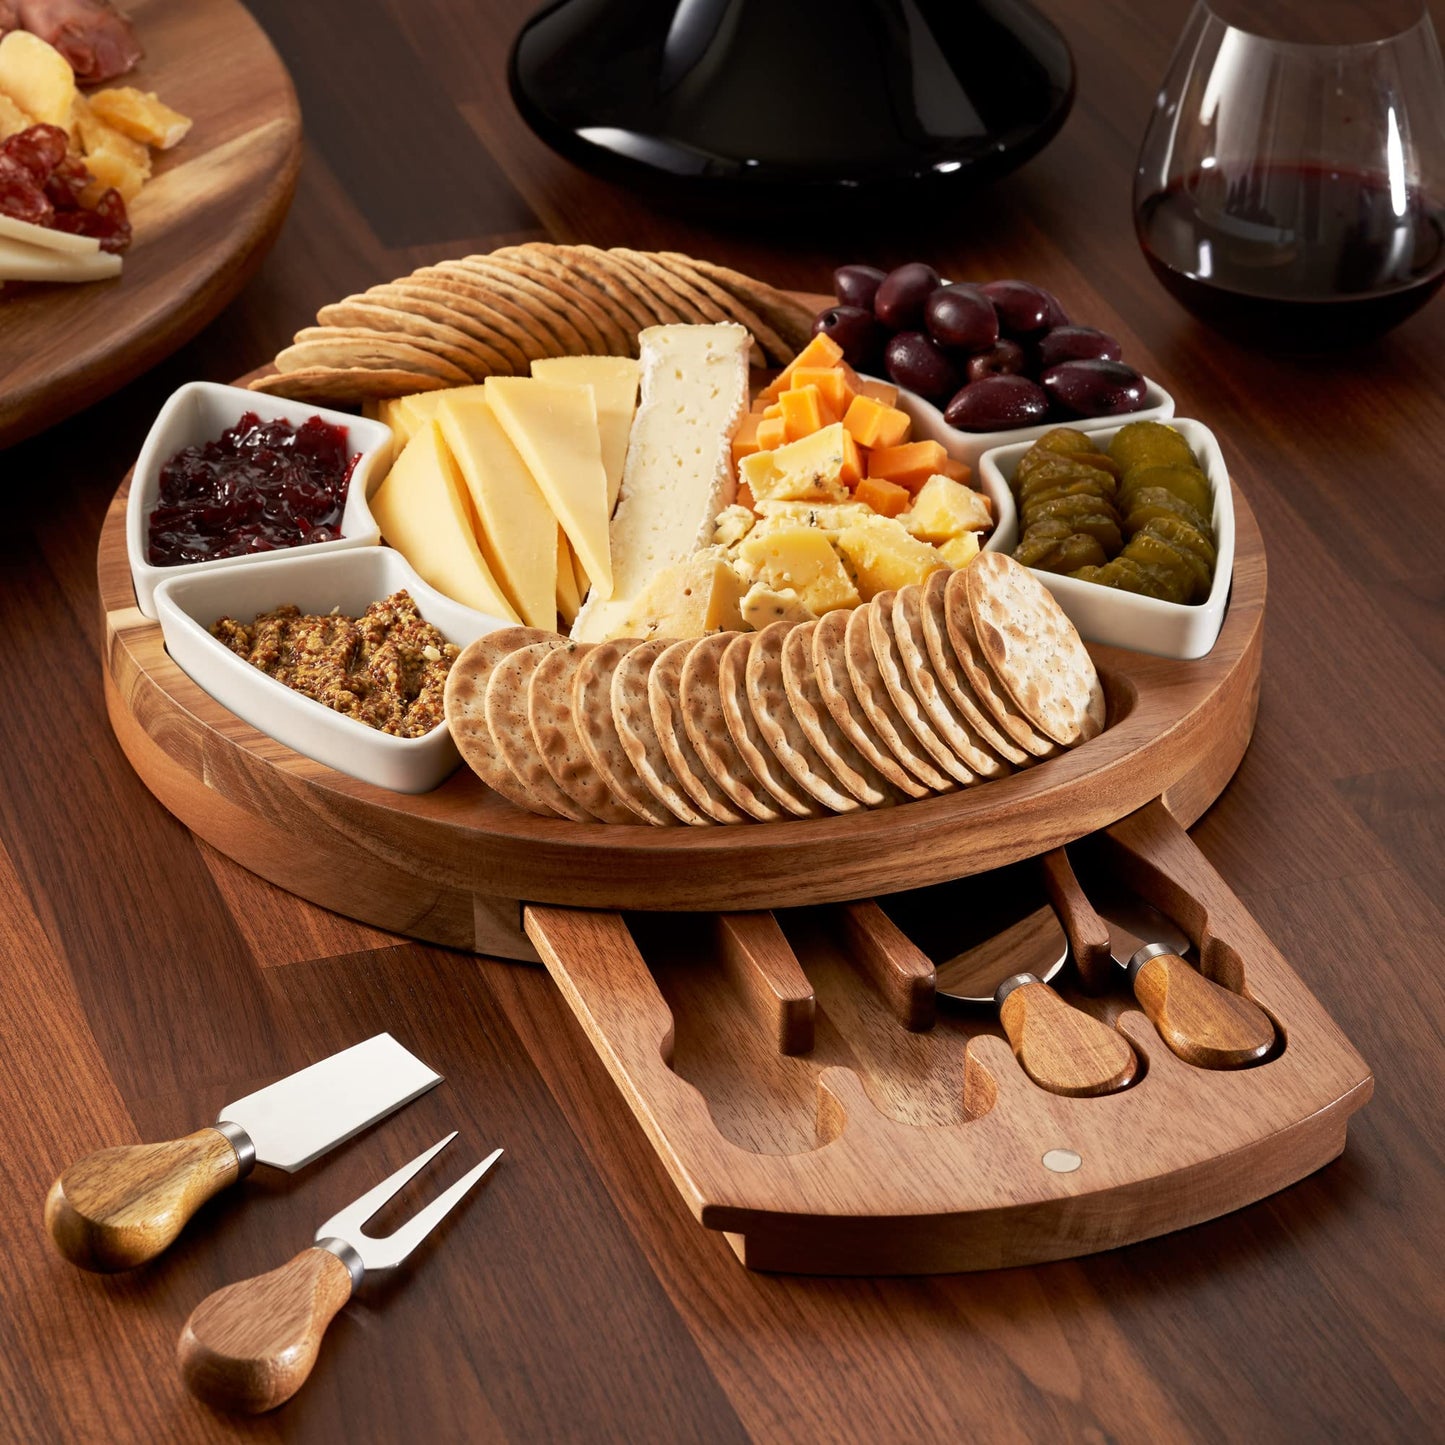 Premium Charcuterie Cutting Board Set - Cheese Board Set and Serving Platter - 13 inch Meat/Cheese Board w/Knife Set incl 4 Knives and 4 Bowls Server Plate